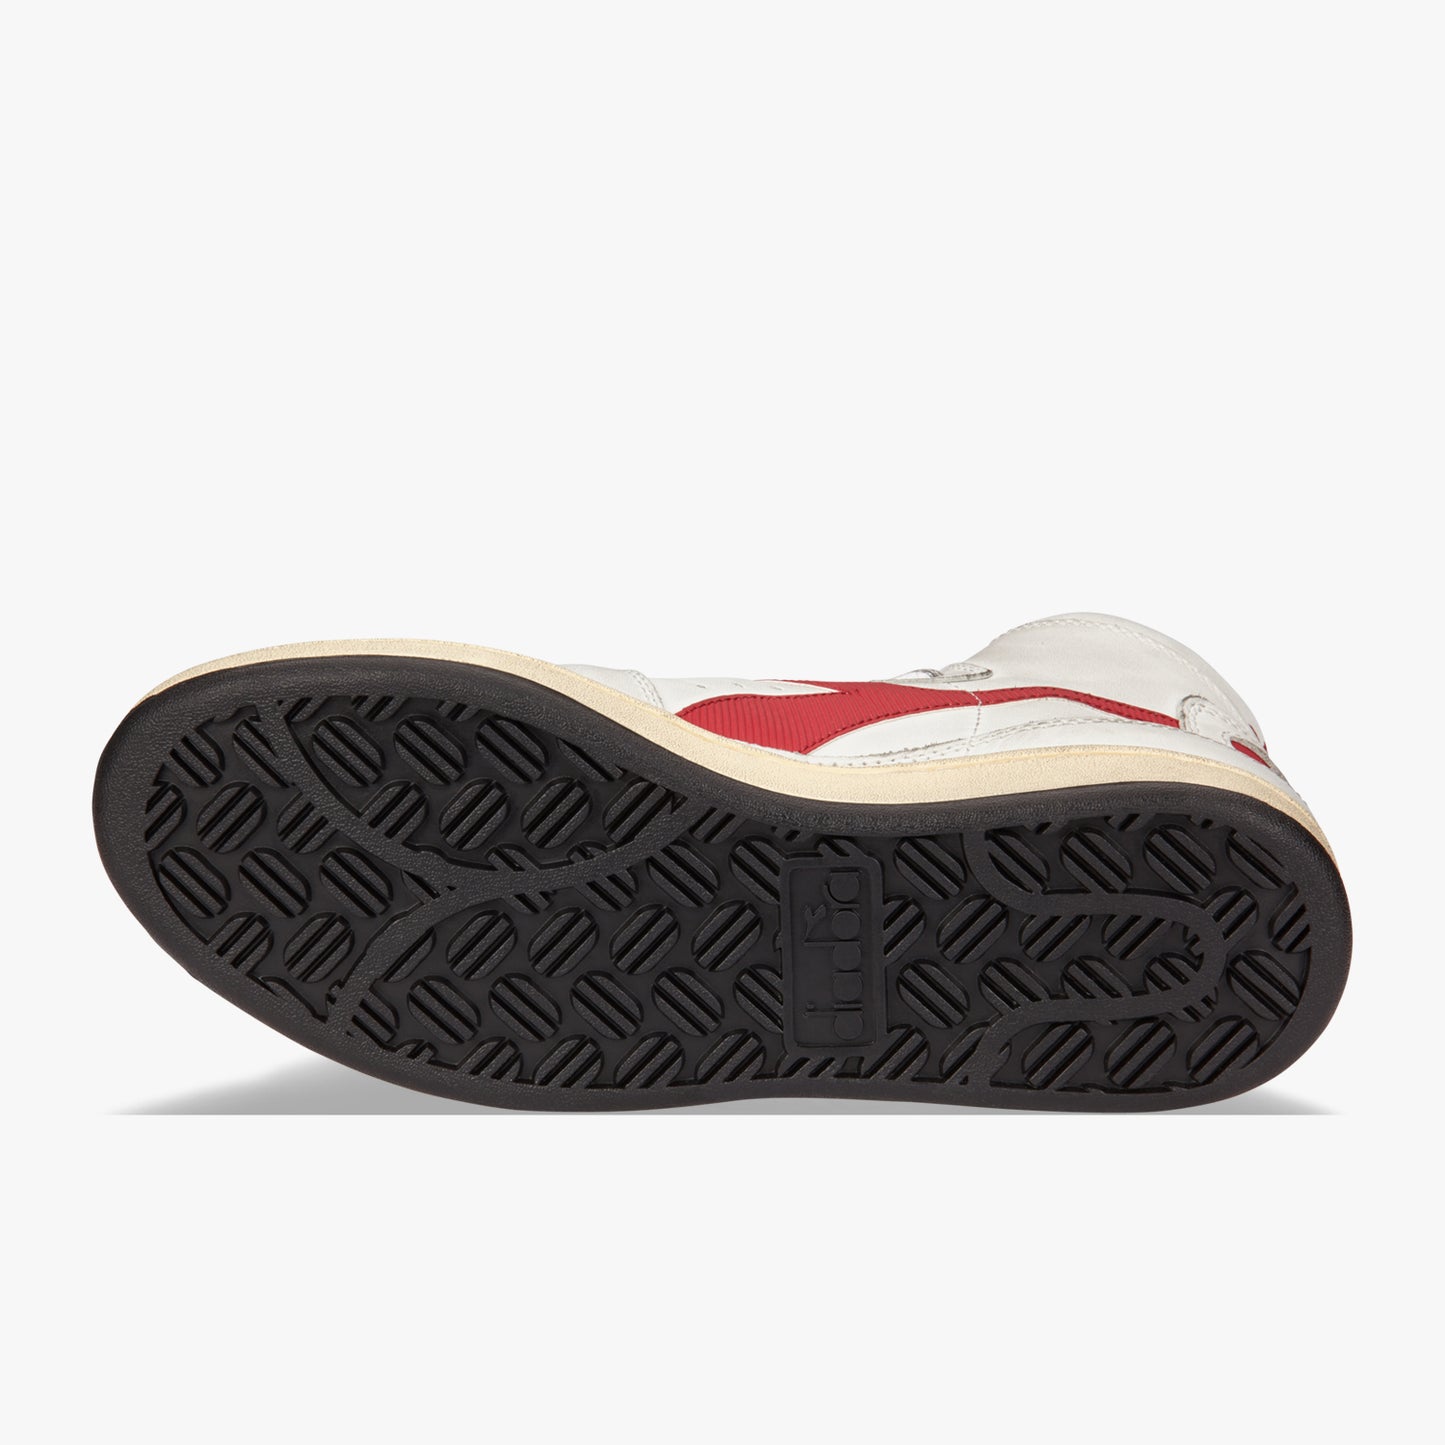 bottom view of sole of diadora white mi basket used shoe with red stripe